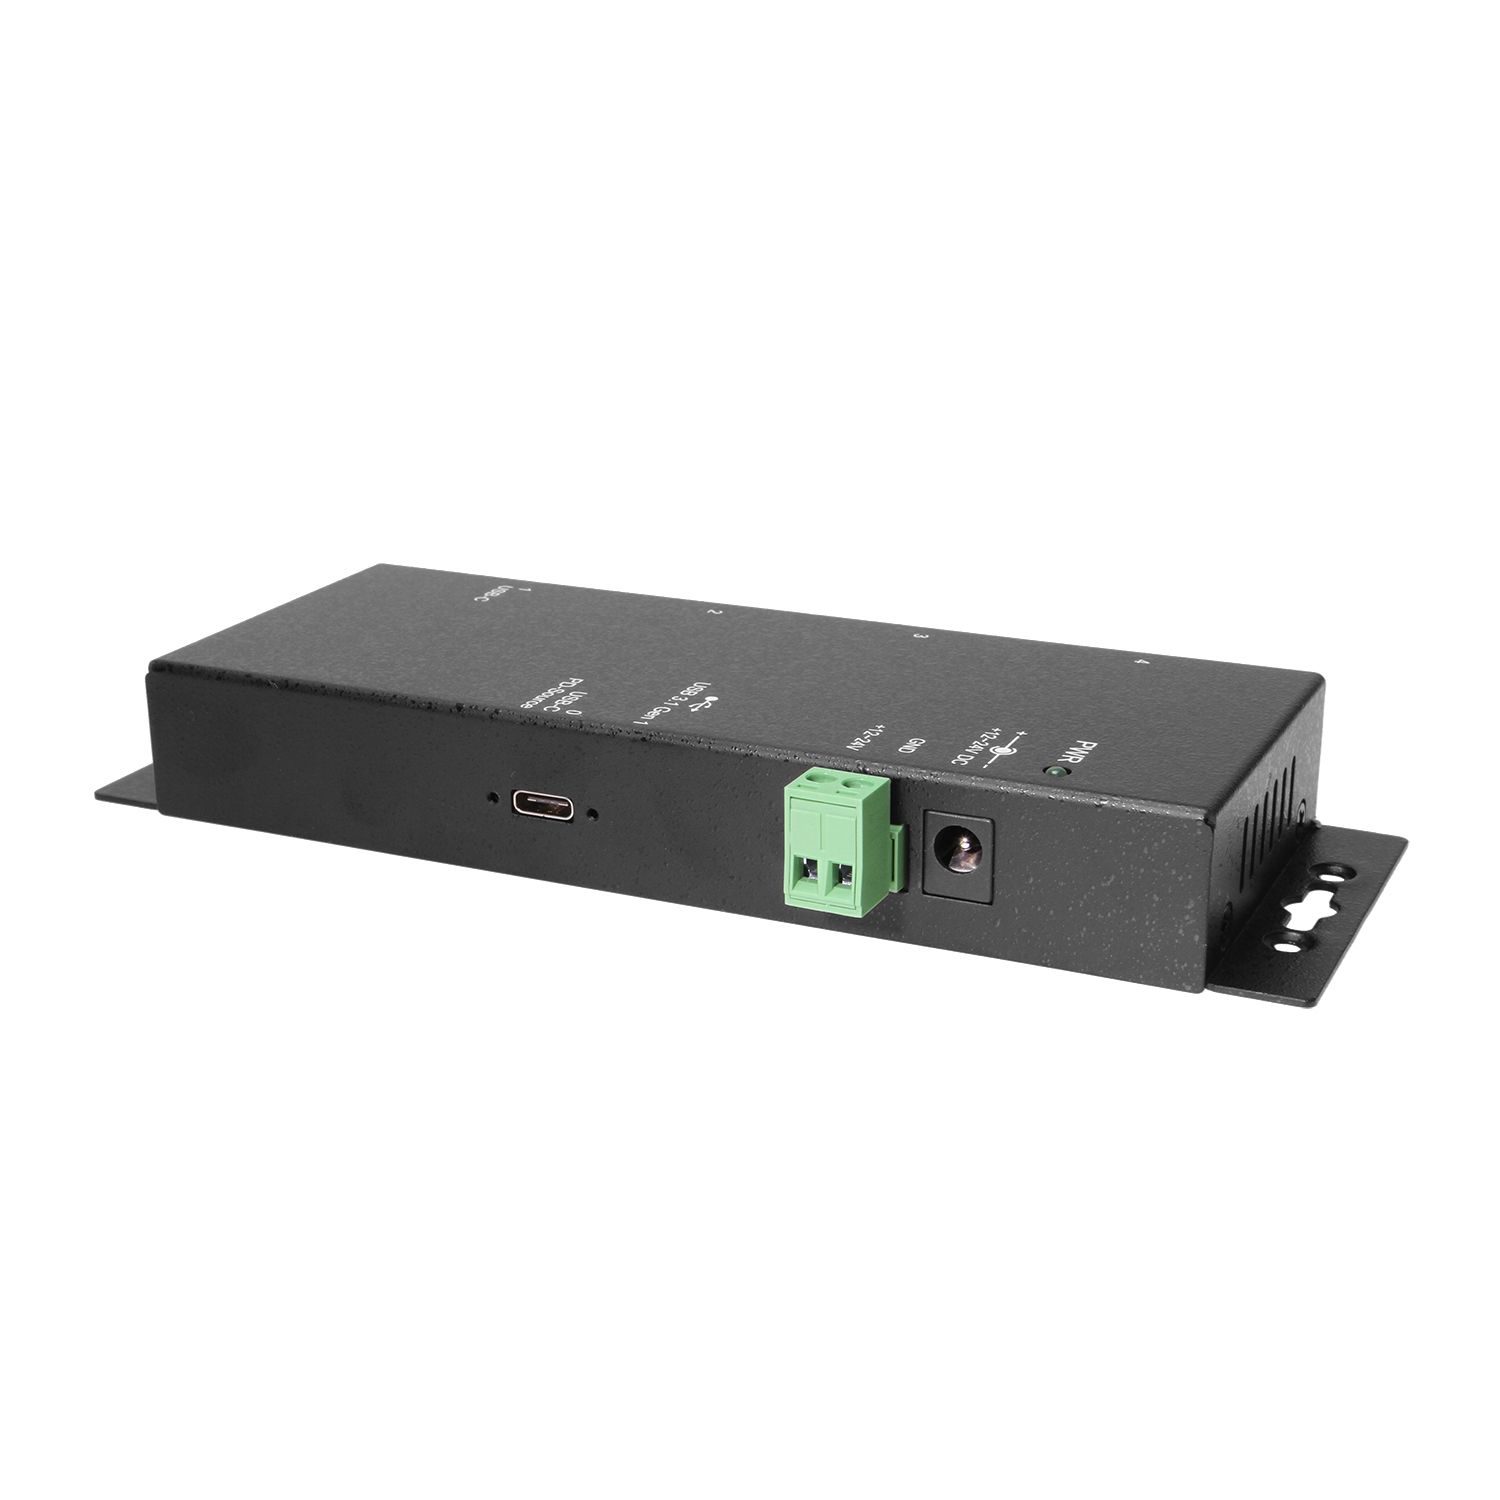 4 Port USB 3.2 Gen 1 Type-C Delivery Hub w/ ESD Surge Protection USB-C Upstream - Coolgear